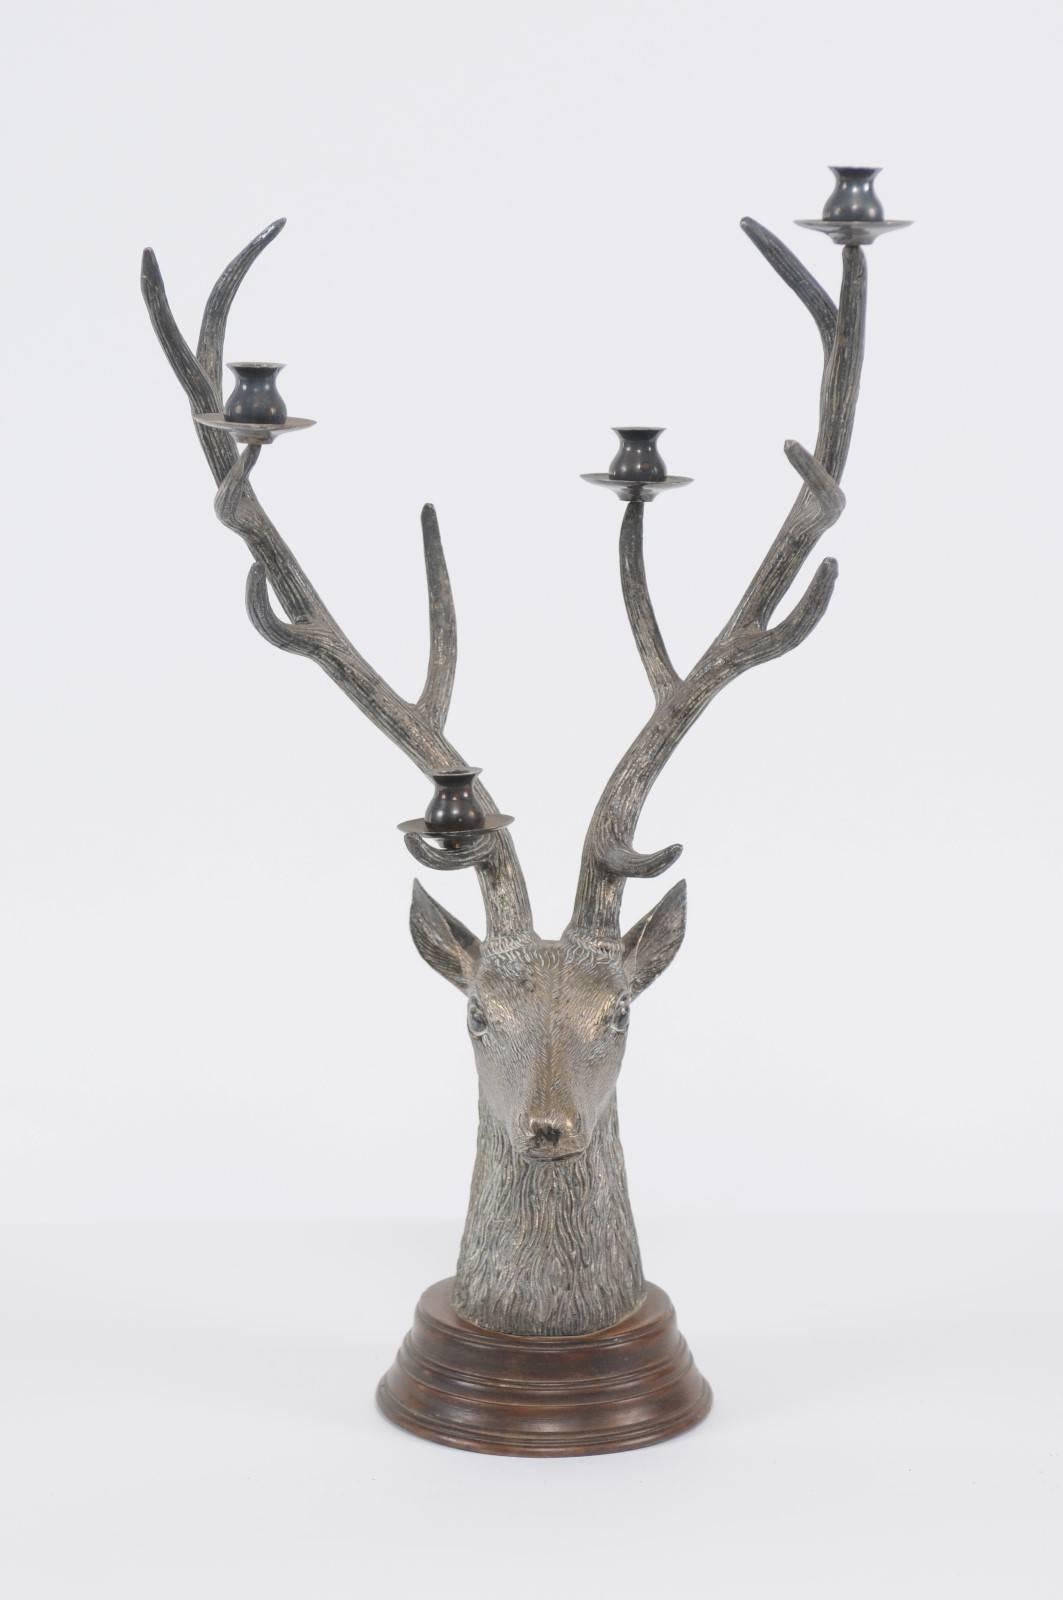 A vintage French bronze buck head candelabra sculpture mounted on a wooden circular base from the mid-20th century. This unusual cast bronze candelabra features an exquisite buck head, depicted in a quite realistic manner. Its tall antlers, giving